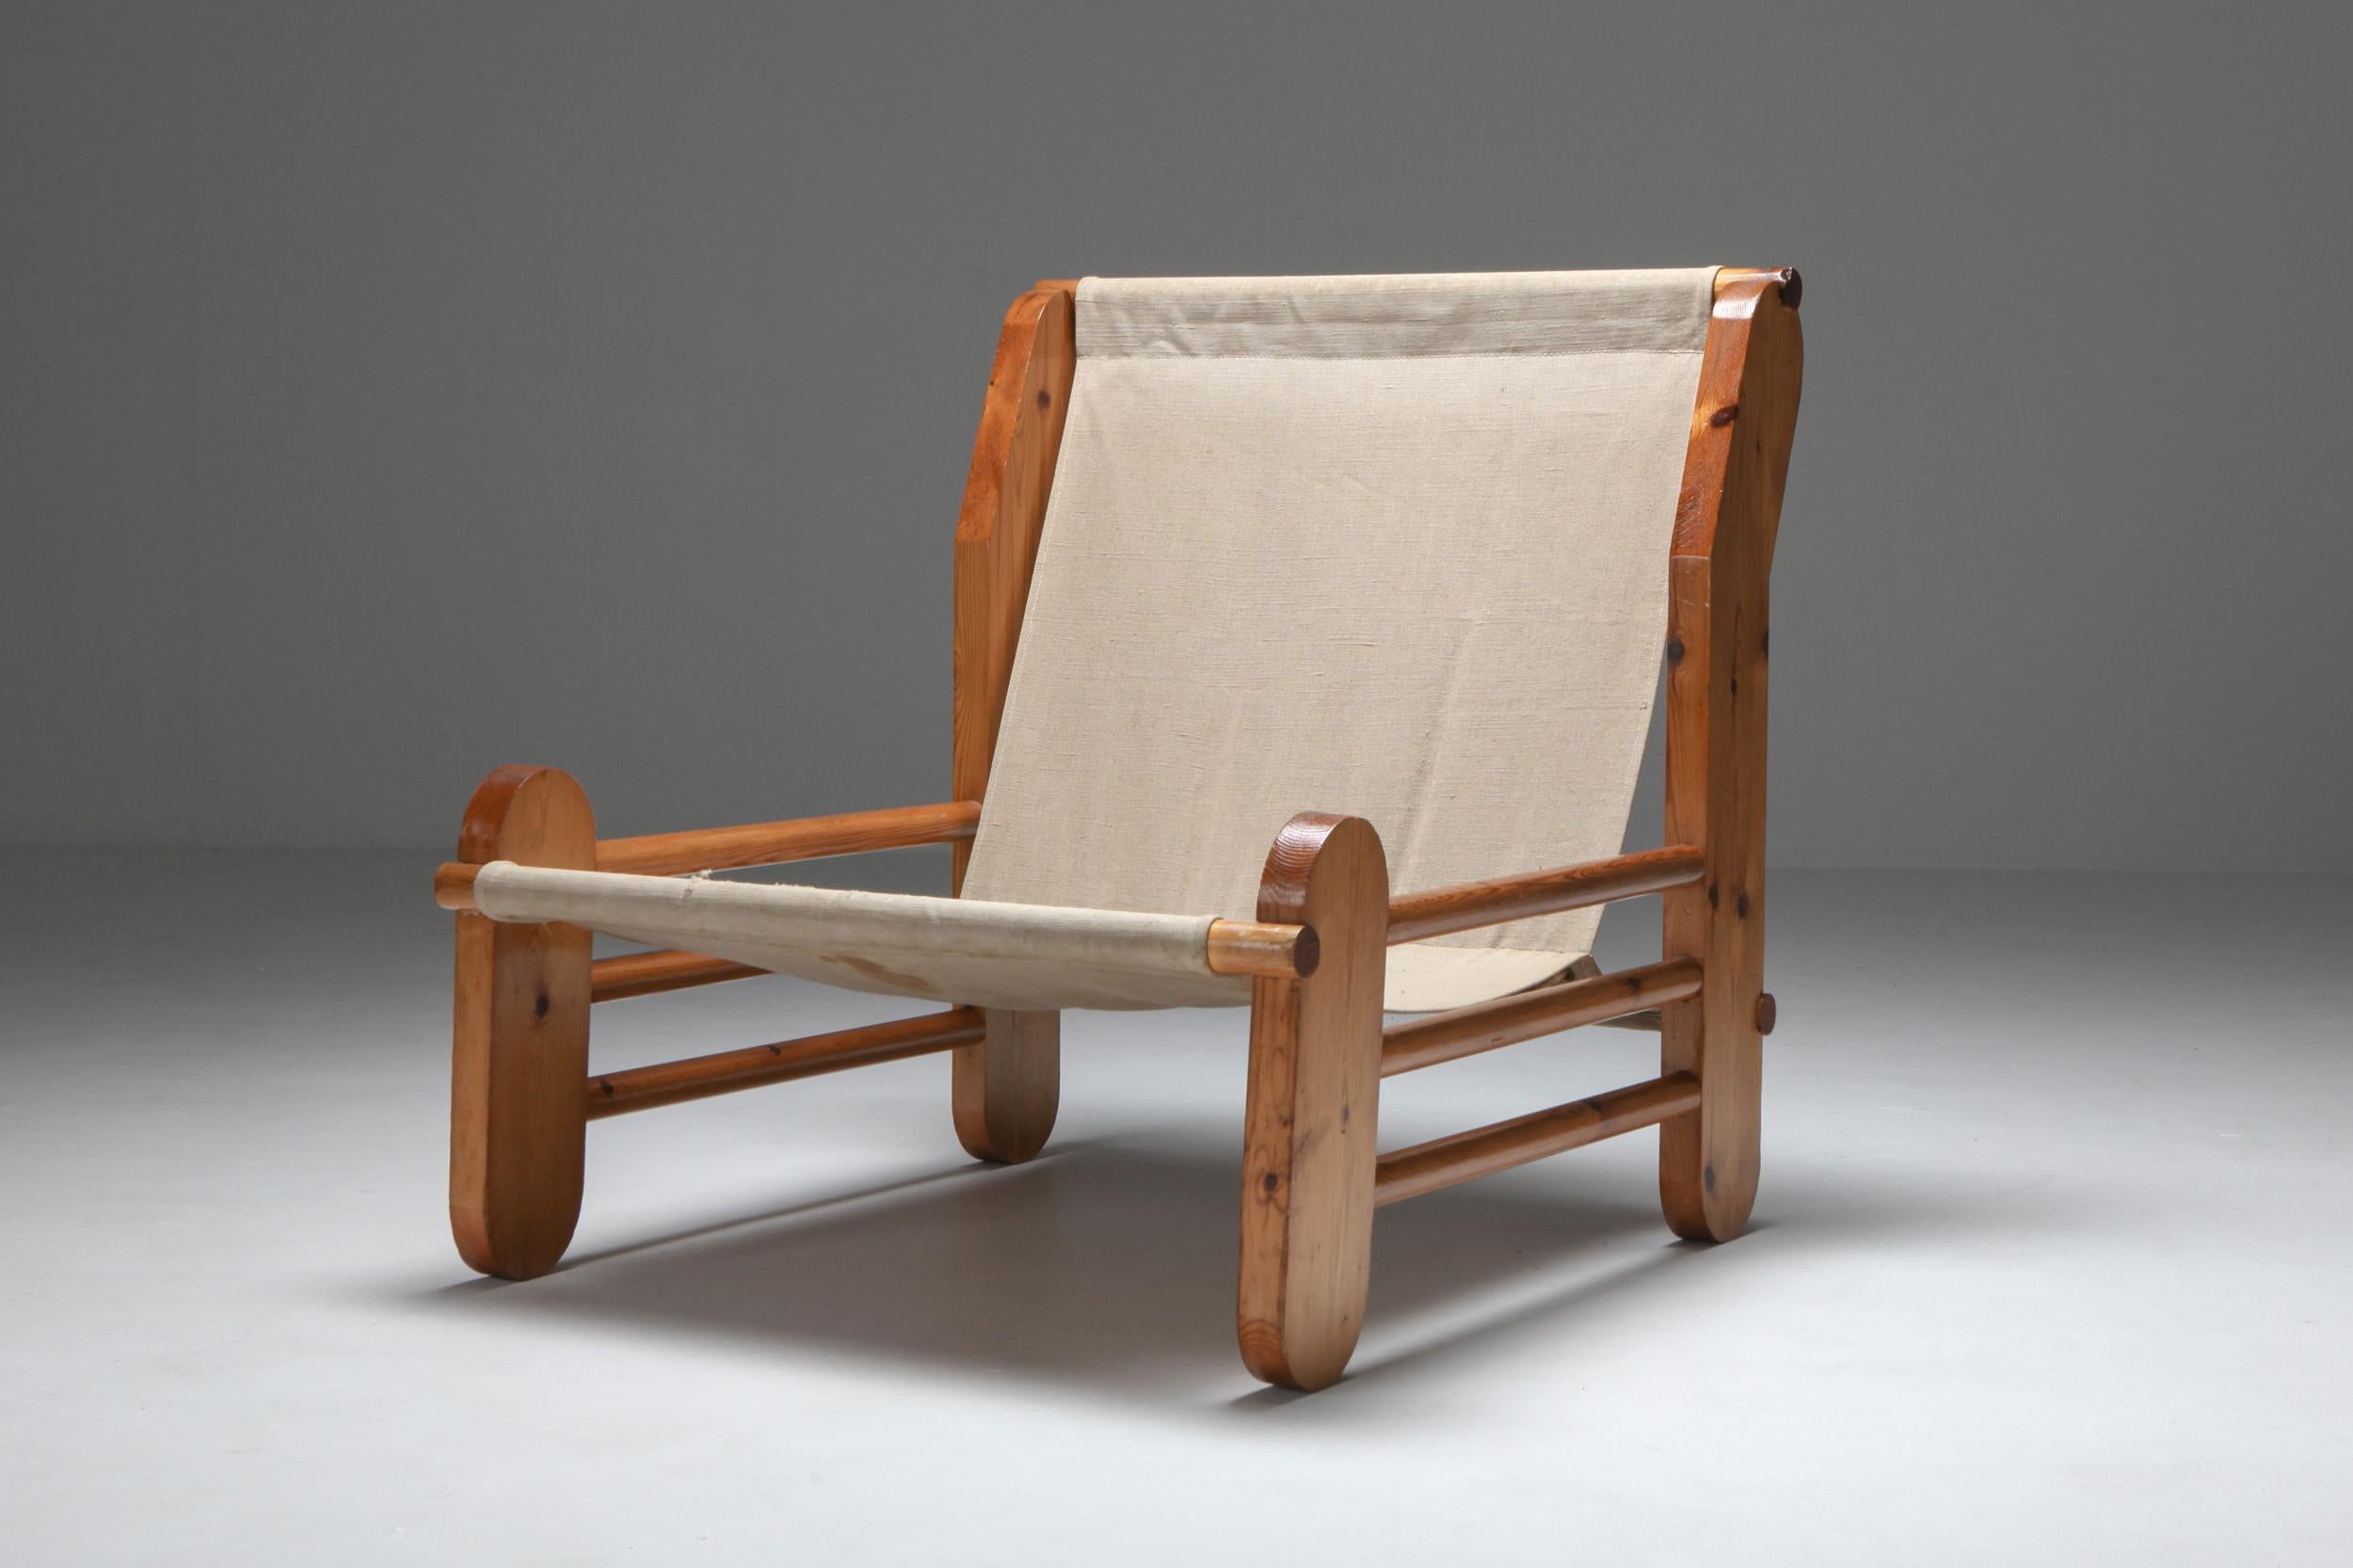 European Pine Lounge Chair with Canvas Seating, 1970s